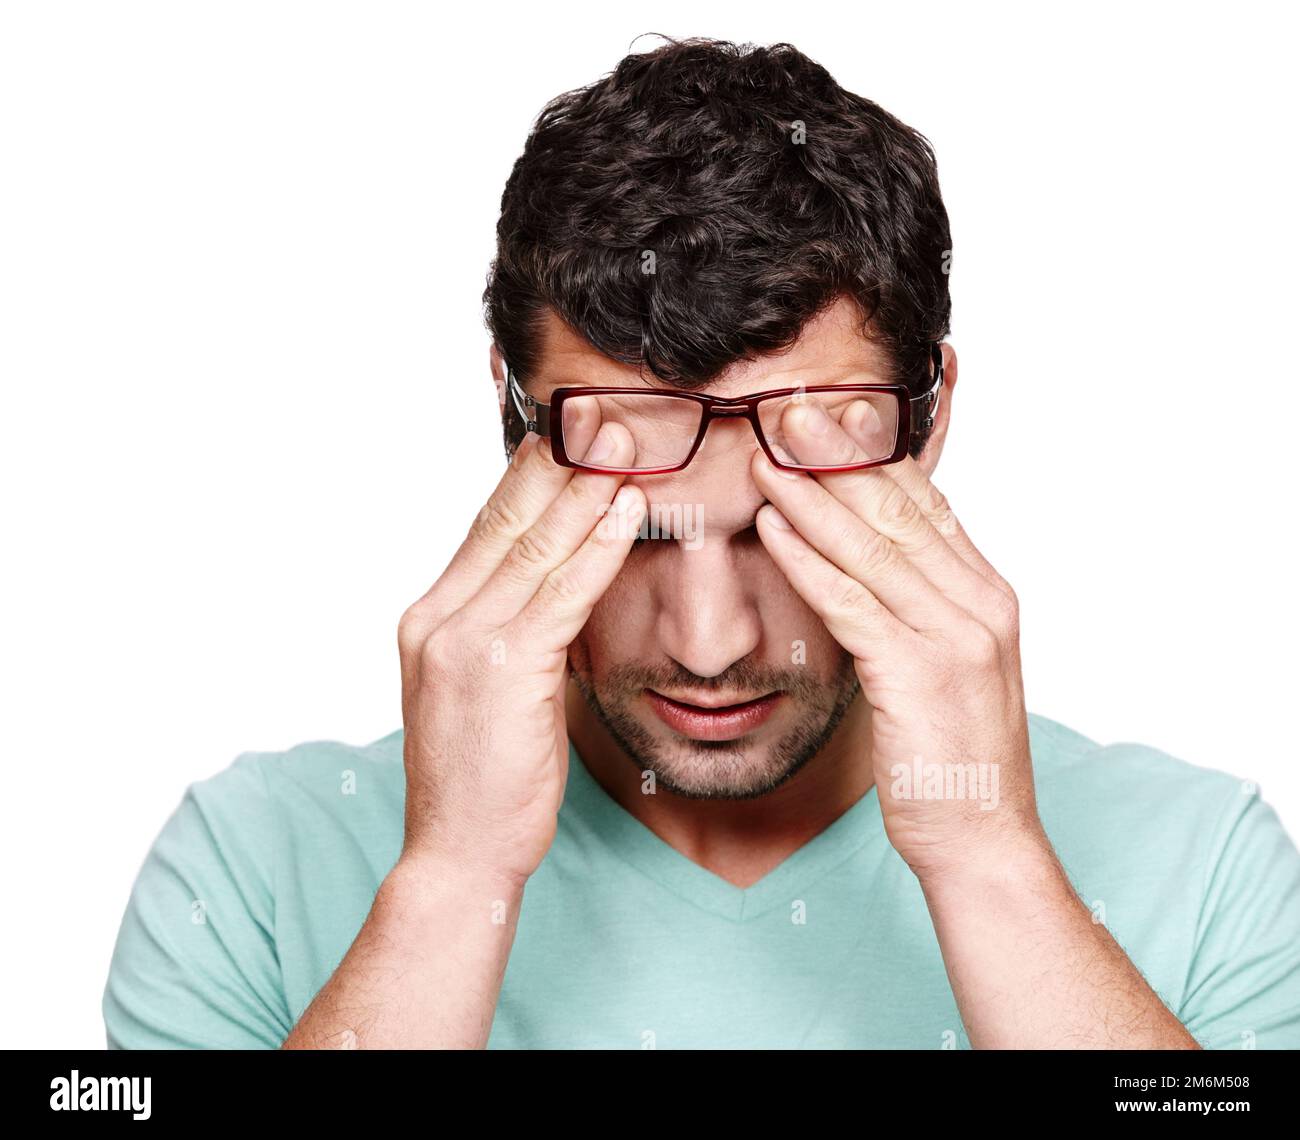 When will this headache end. A young man rubbing his forehead while isolated on a white background. Stock Photo